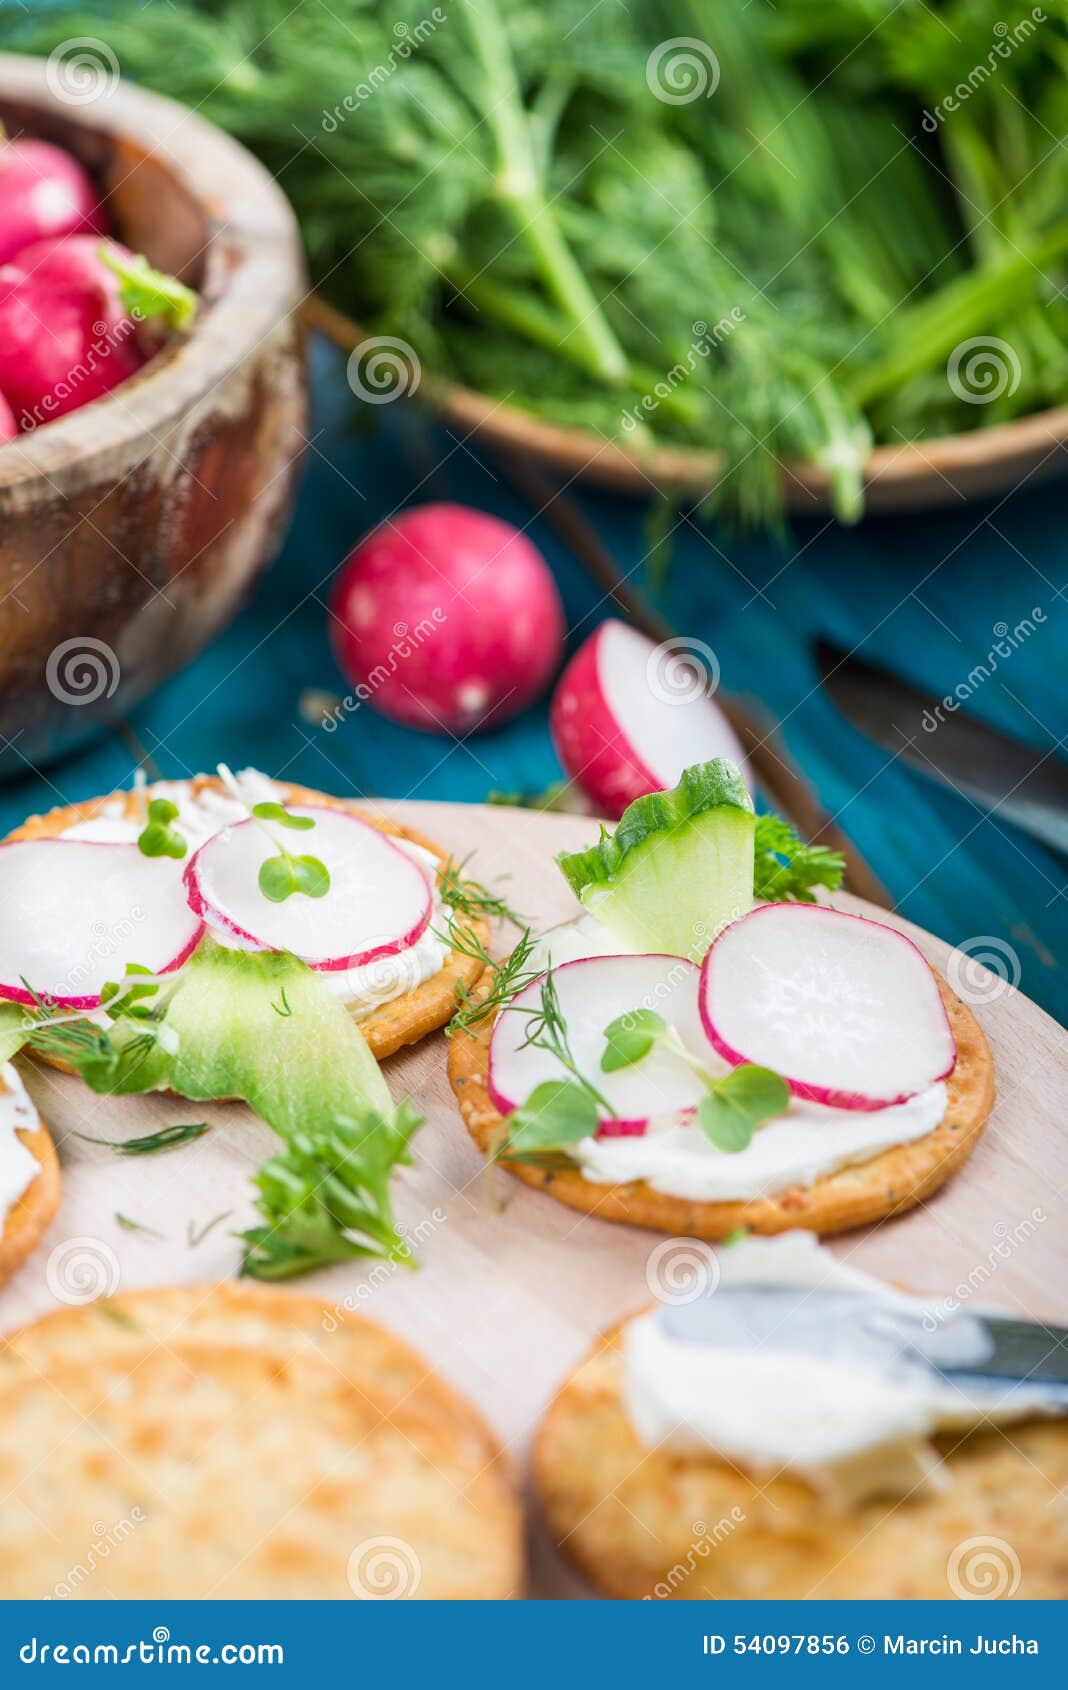 Healthy Snacks Crackers With Cottage Cheese And Fresh Vegetables